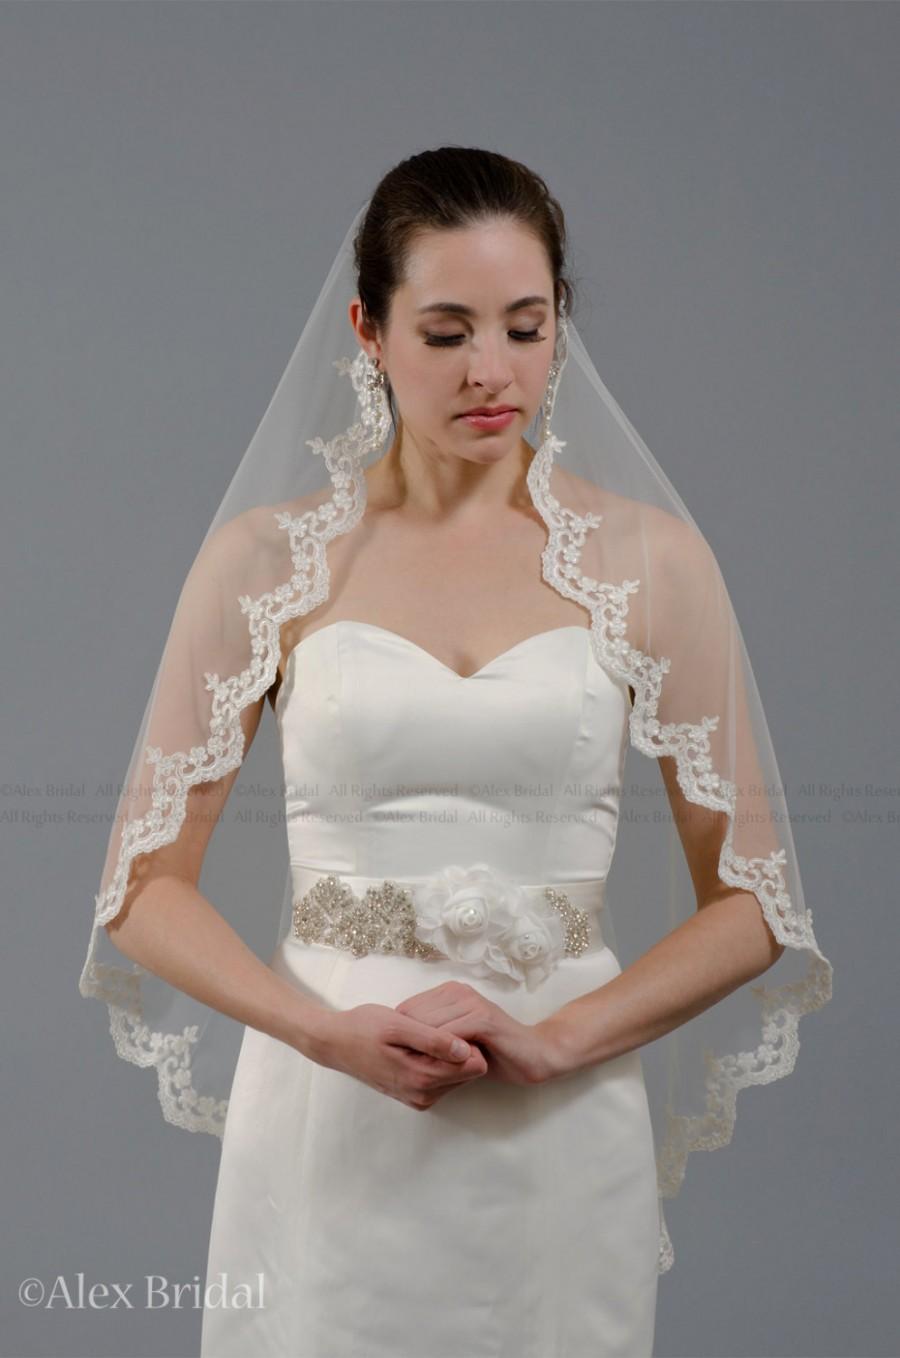 Wedding - Mantilla bridal wedding veil 45x36 elbow alencon lace available in ivory and white